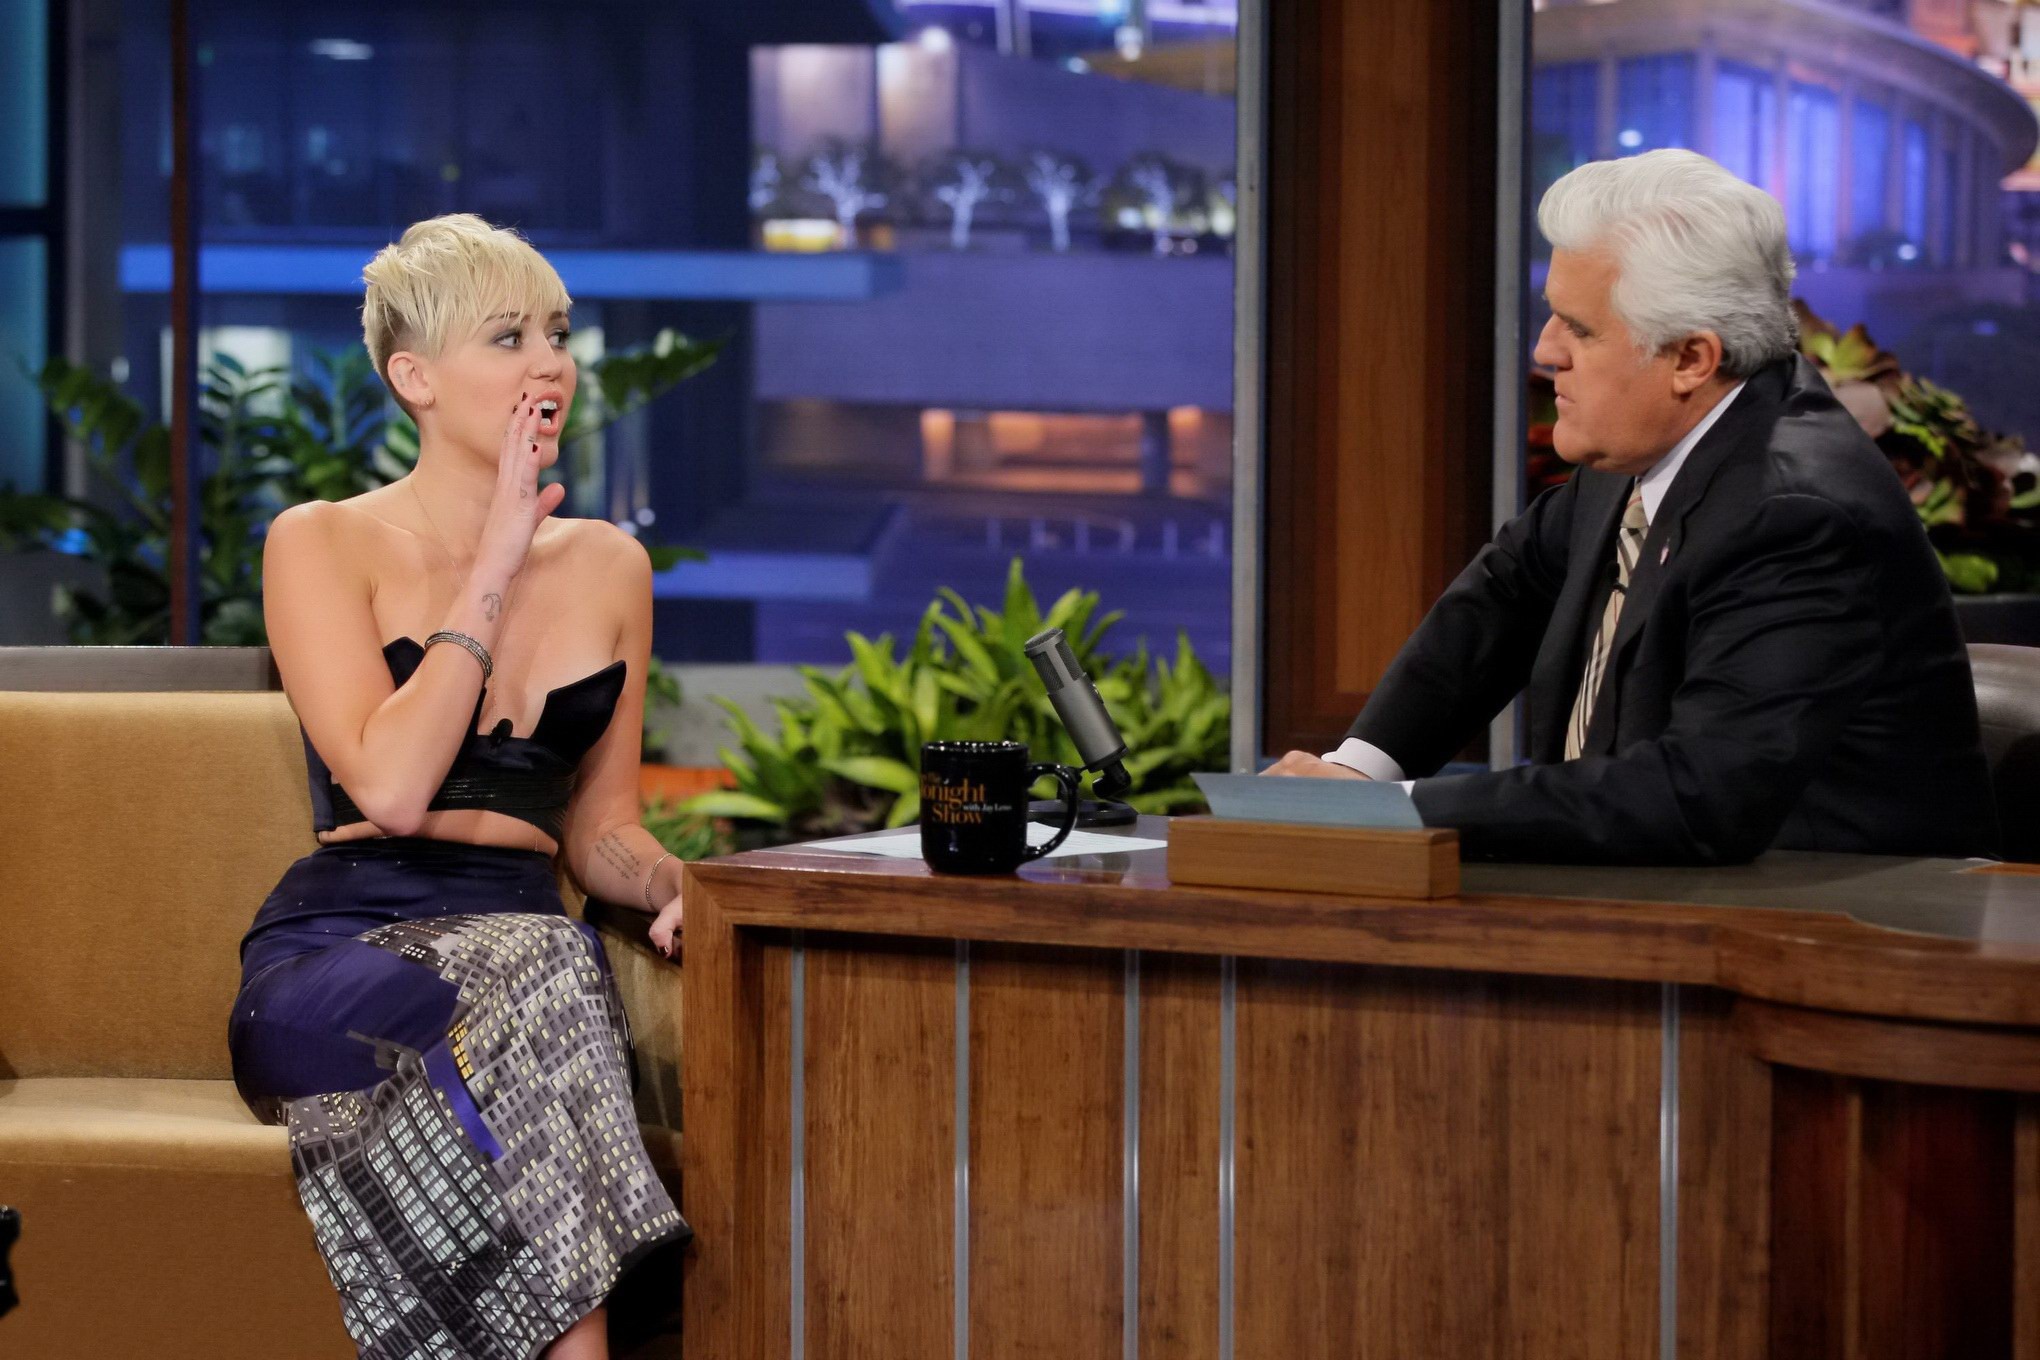 Miley Cyrus braless wears very revealing dress on The Tonight Show with Jay Leno #75250759